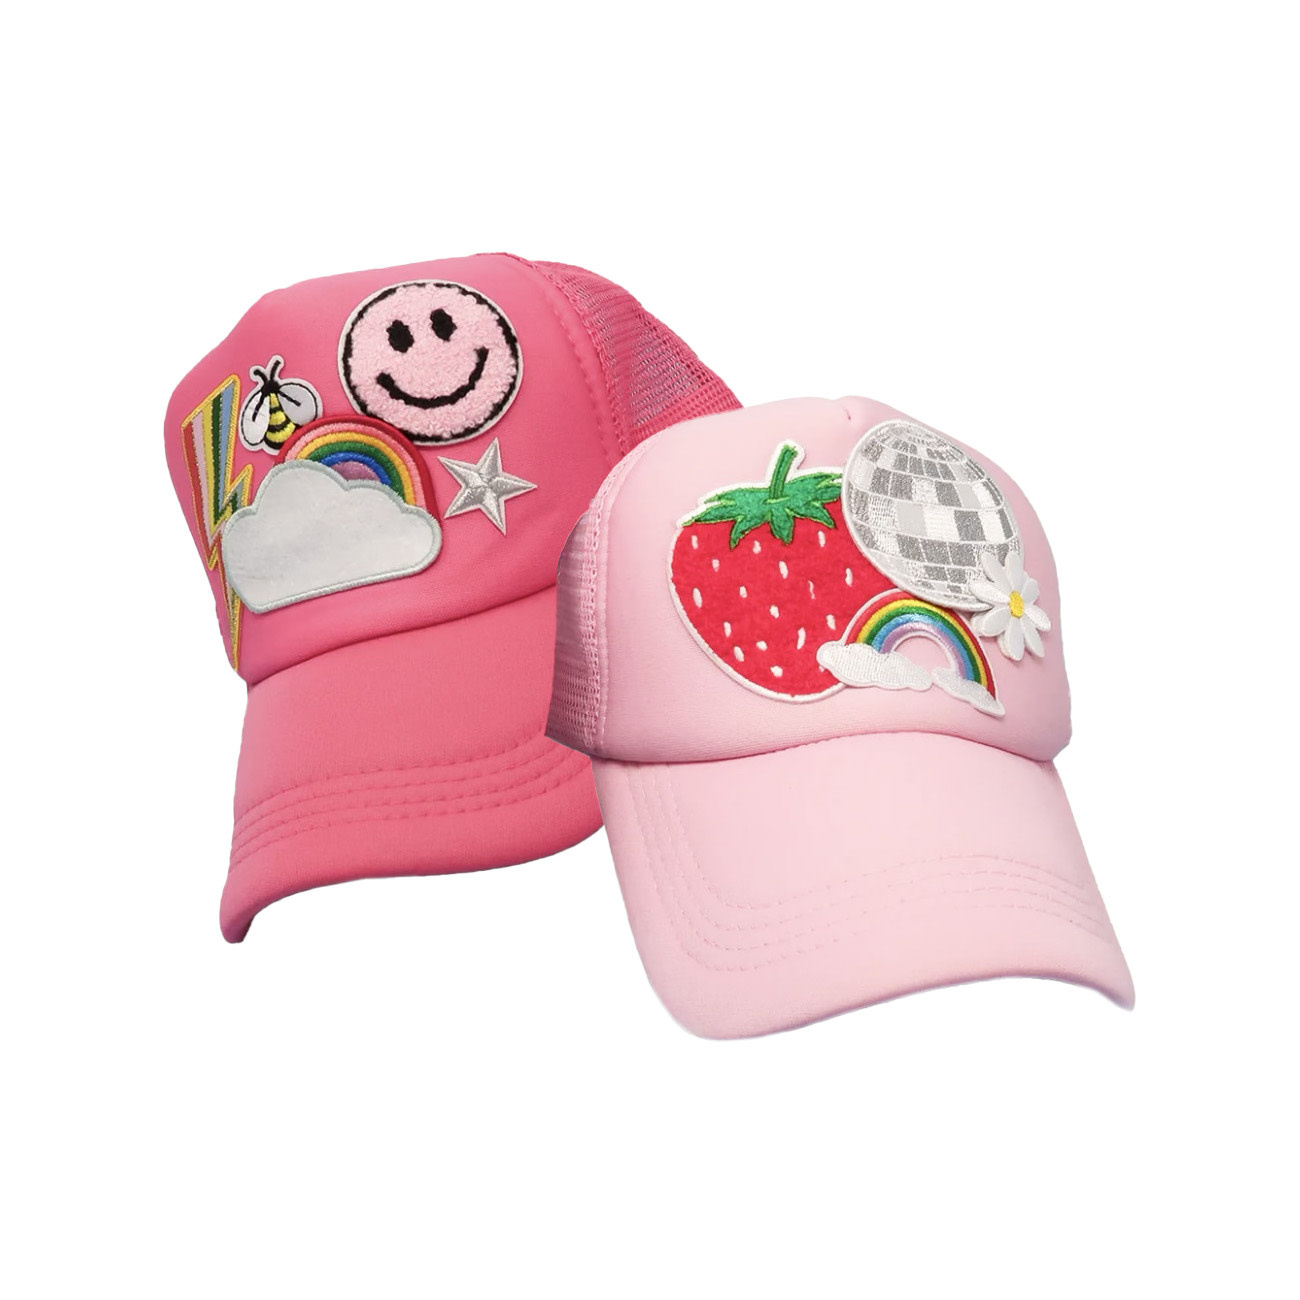 Trucker Hat with Patches, Trucker Hat with a Hat Band, Custom Trucker Hats,  Pink Trucjer Hat, Hats for Women